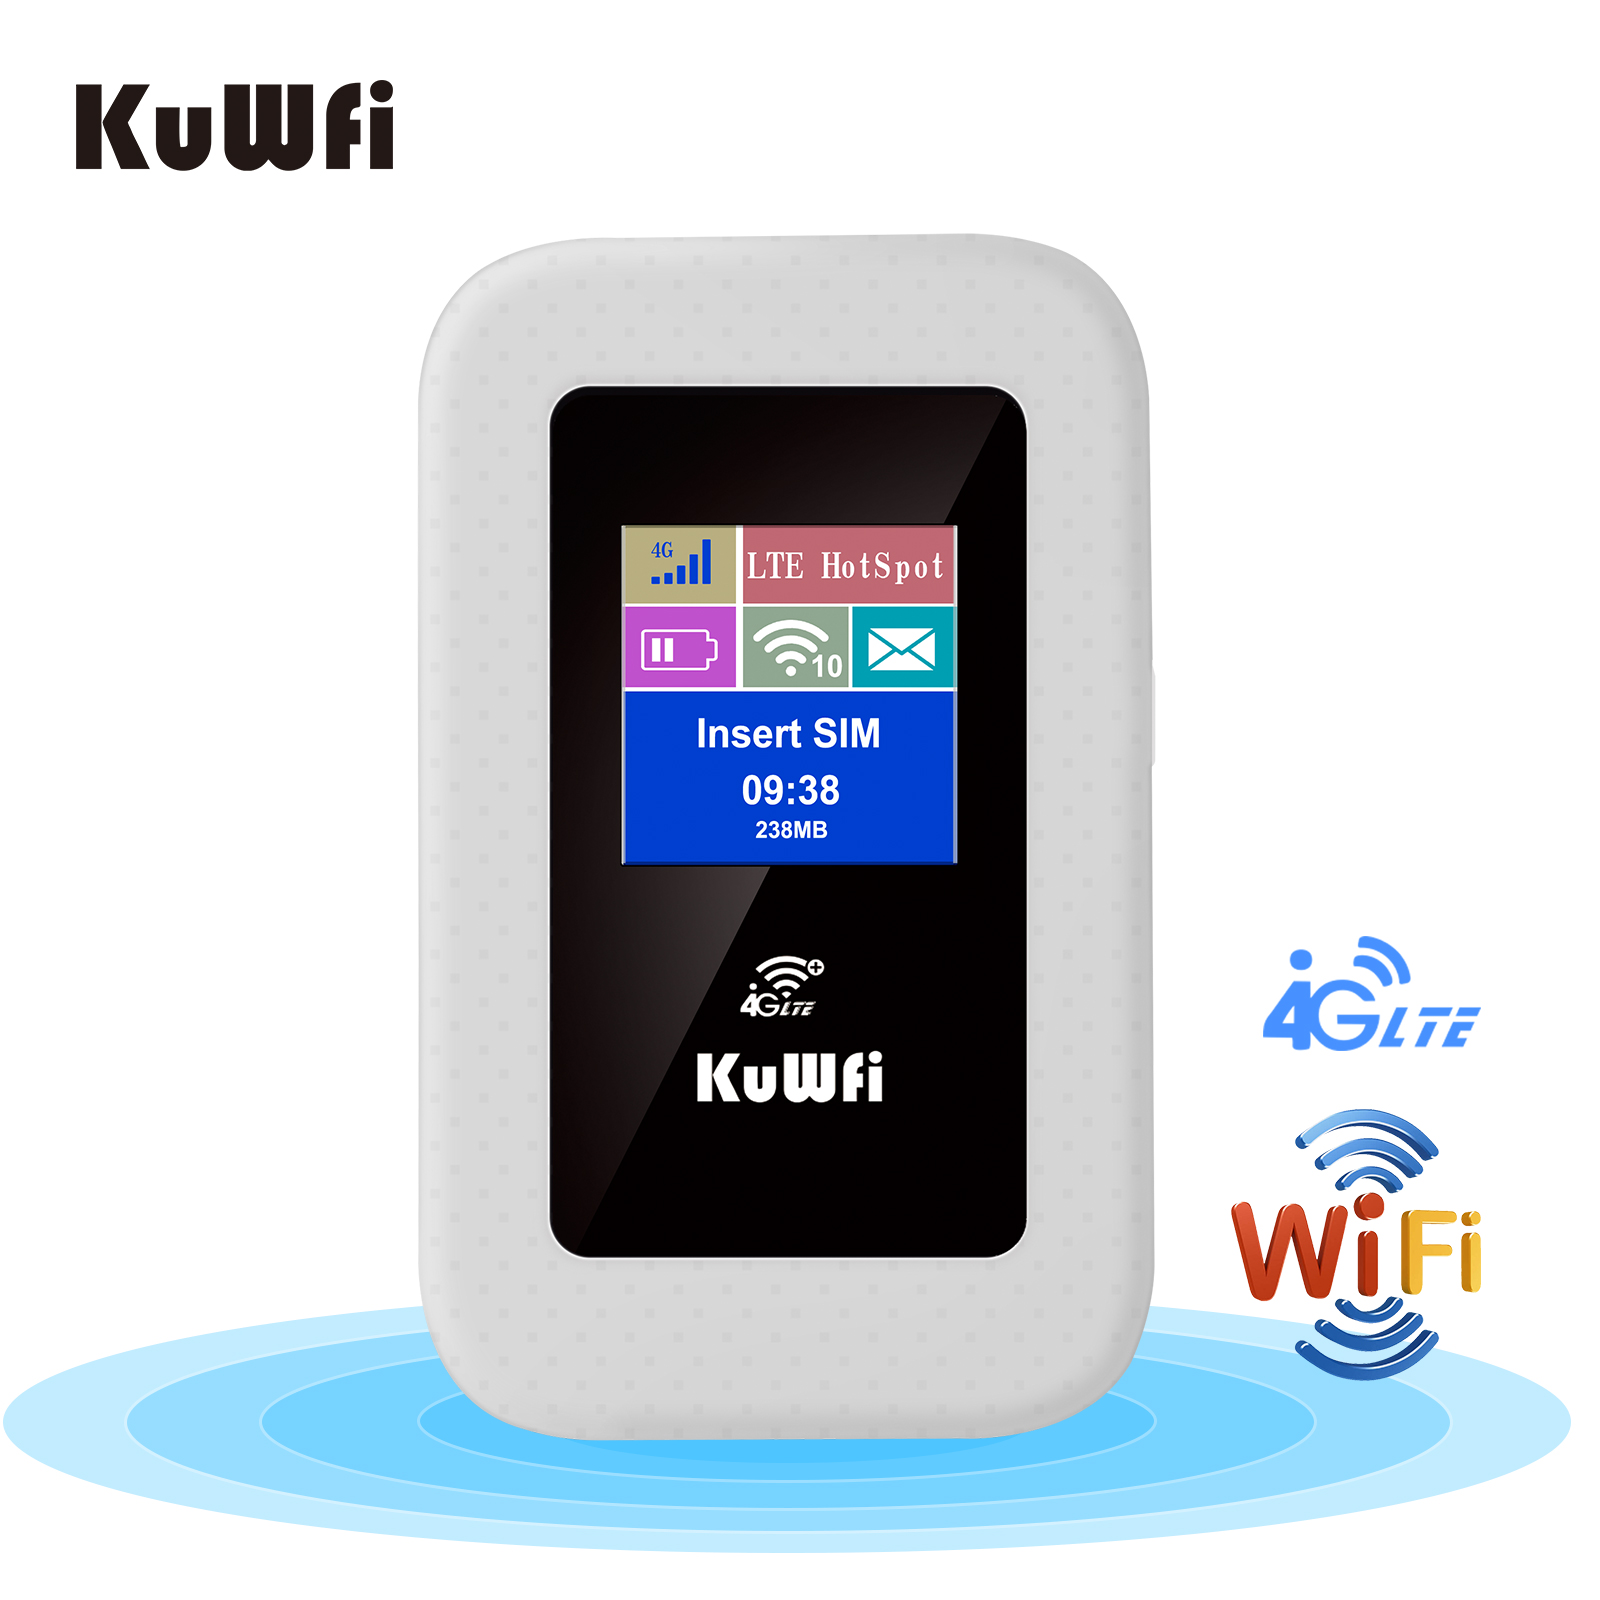 Kuwfi 4g mobile router unlocked wifi 4g router with sim card